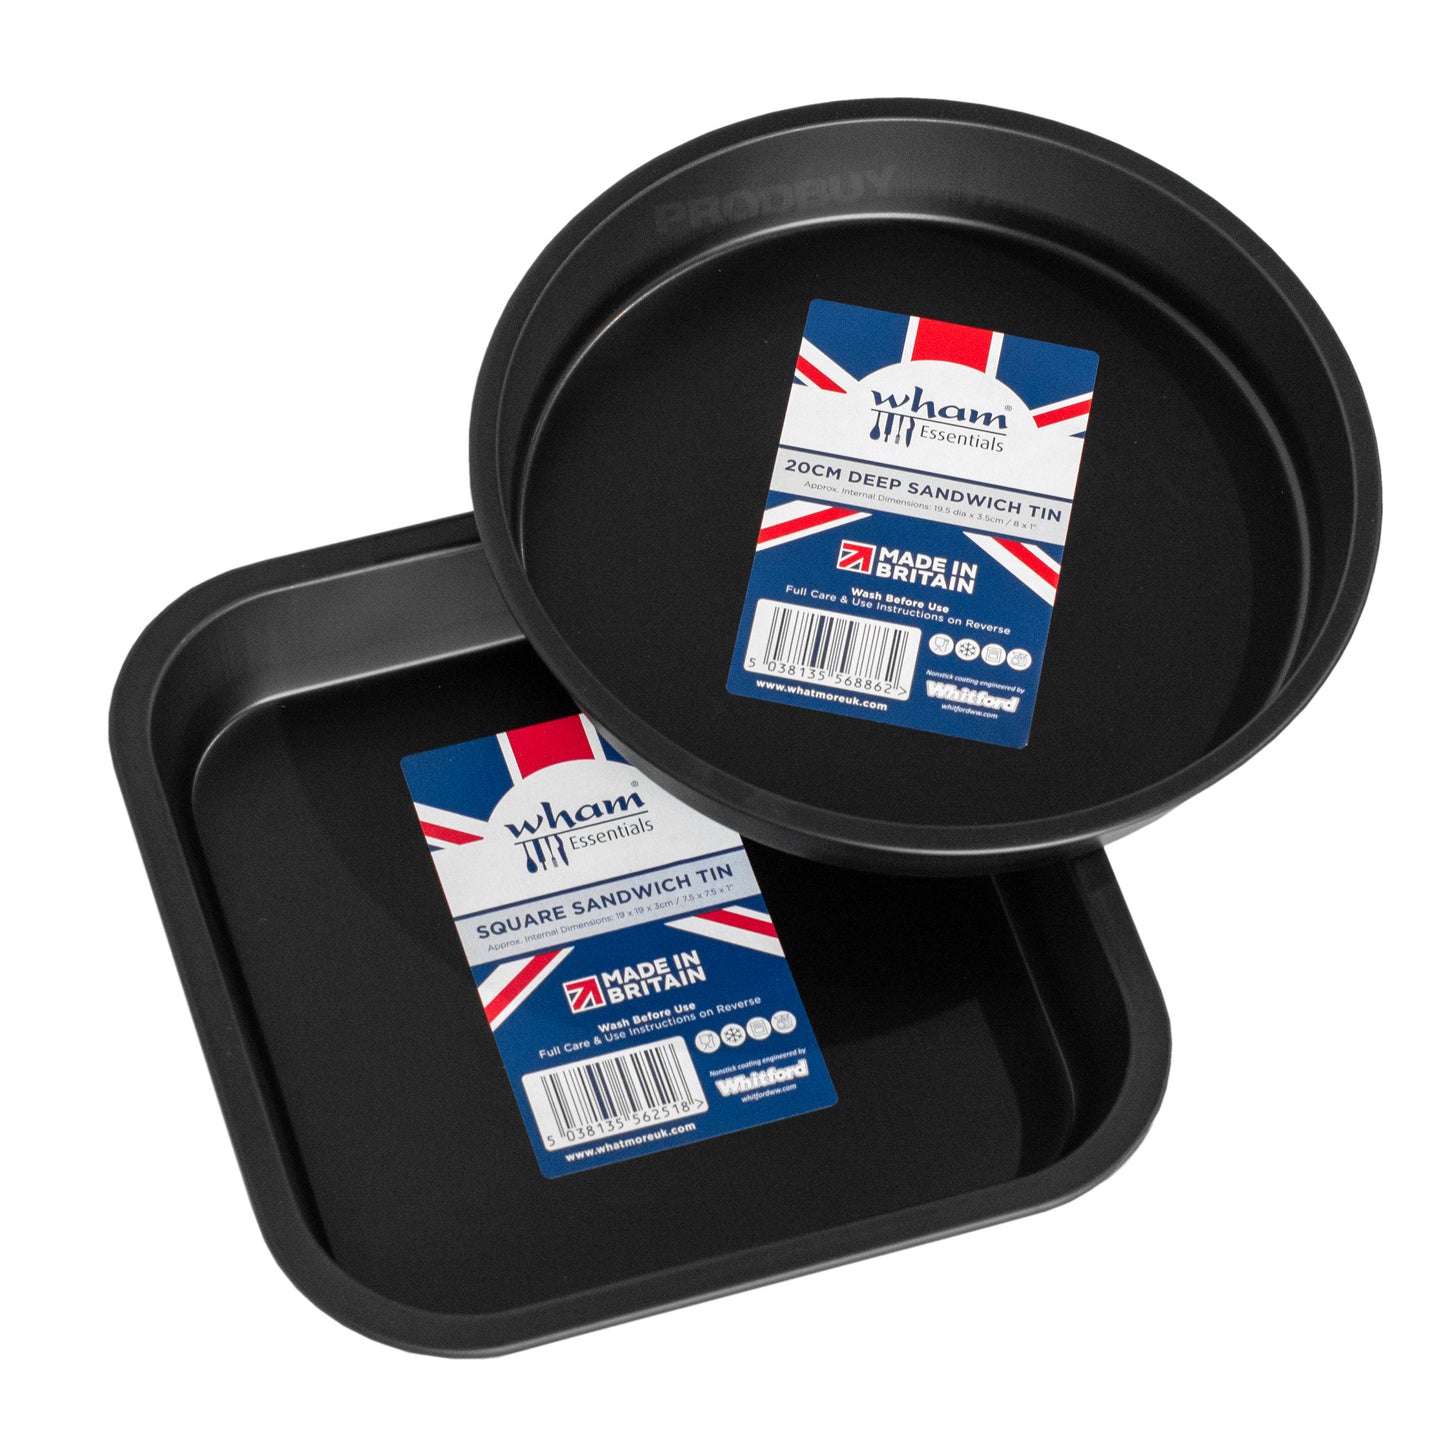 Set of 2 Square & Round Deep Oven Sandwich Tins